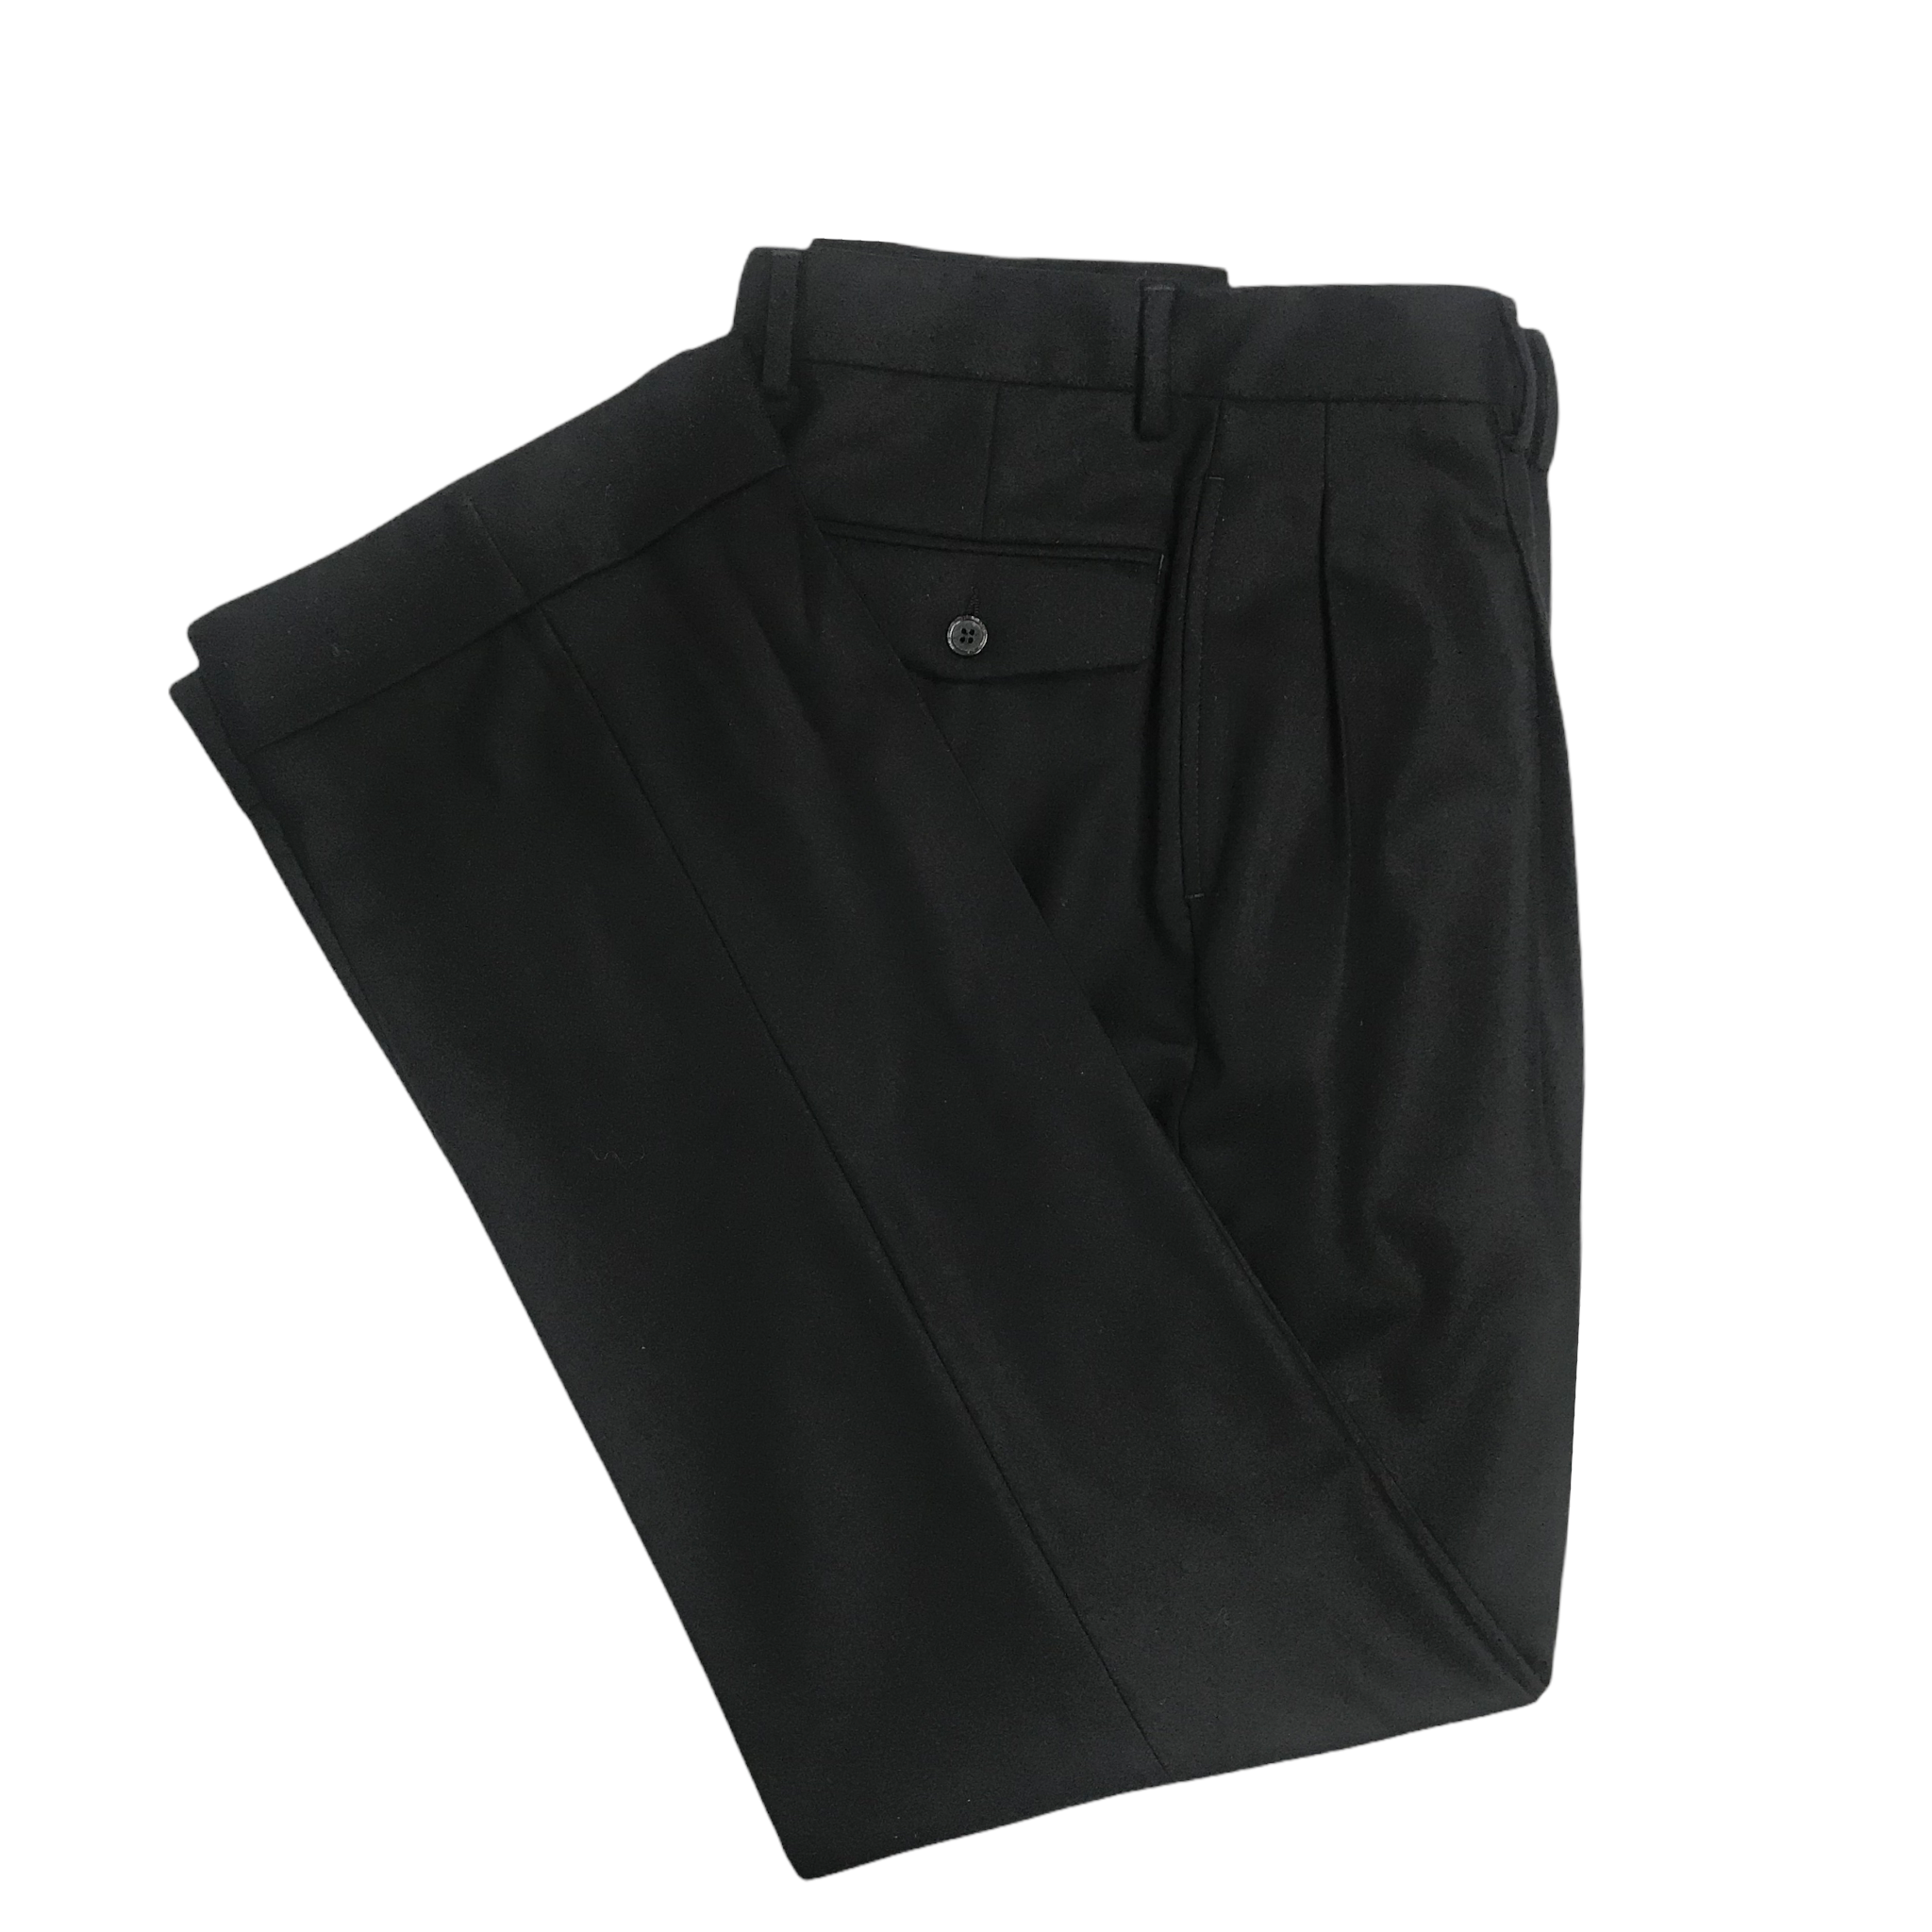 Trousers - Black flannel